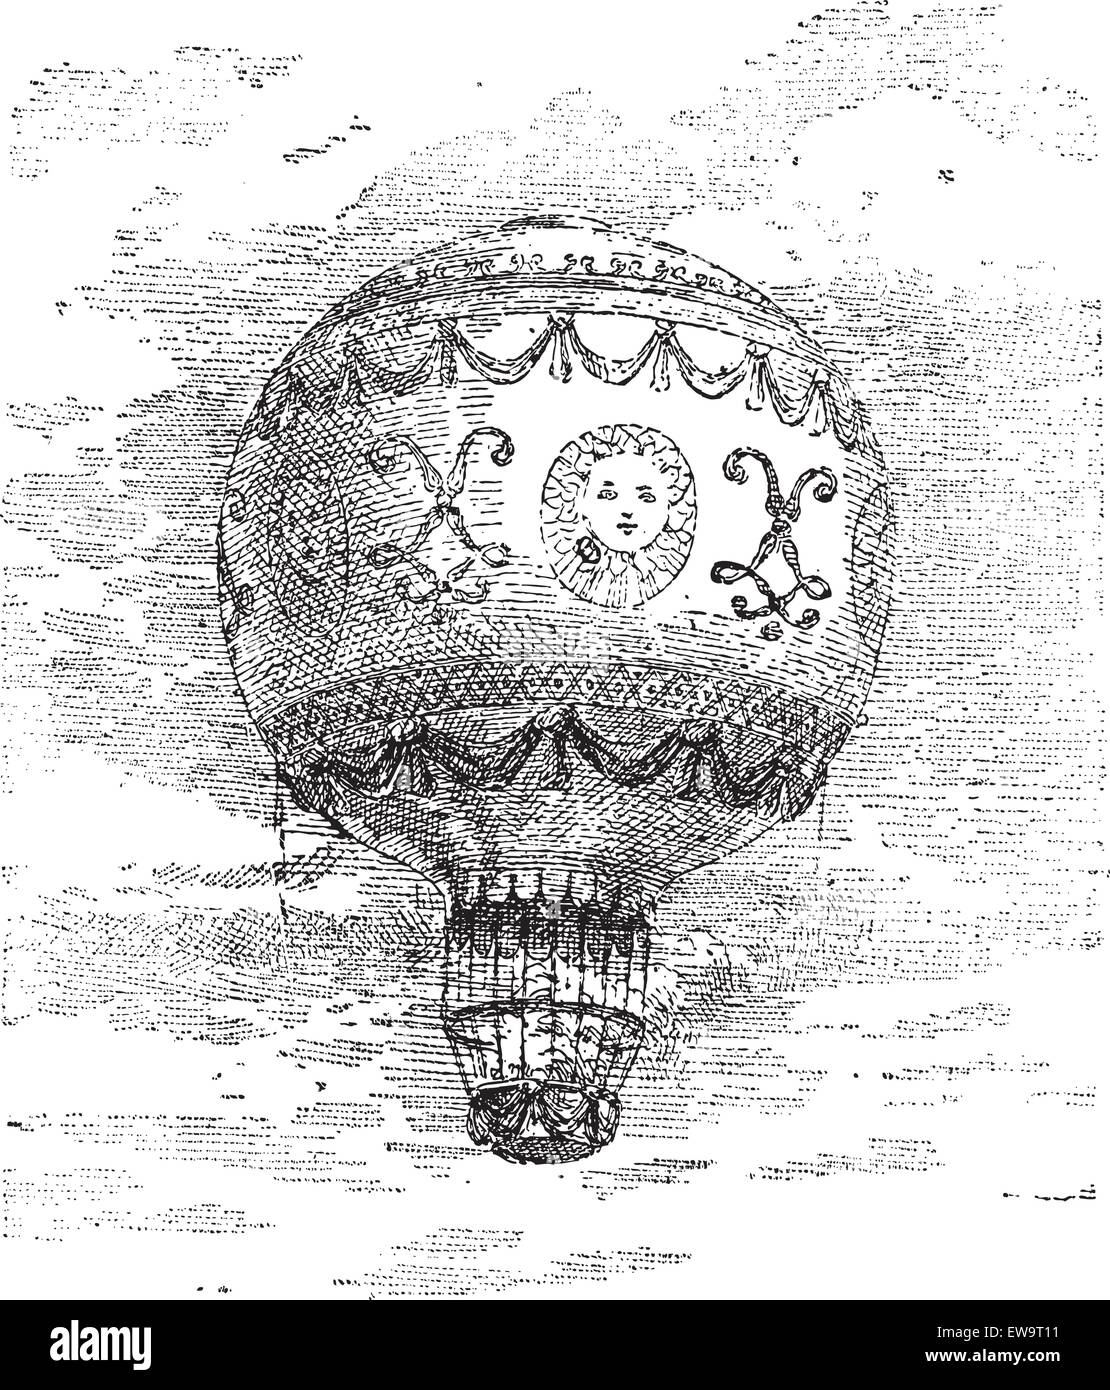 Montgolfier Hot Air Balloon, vintage engraved illustration. Dictionary of Words and Things - Larive and Fleury - 1895 Stock Vector